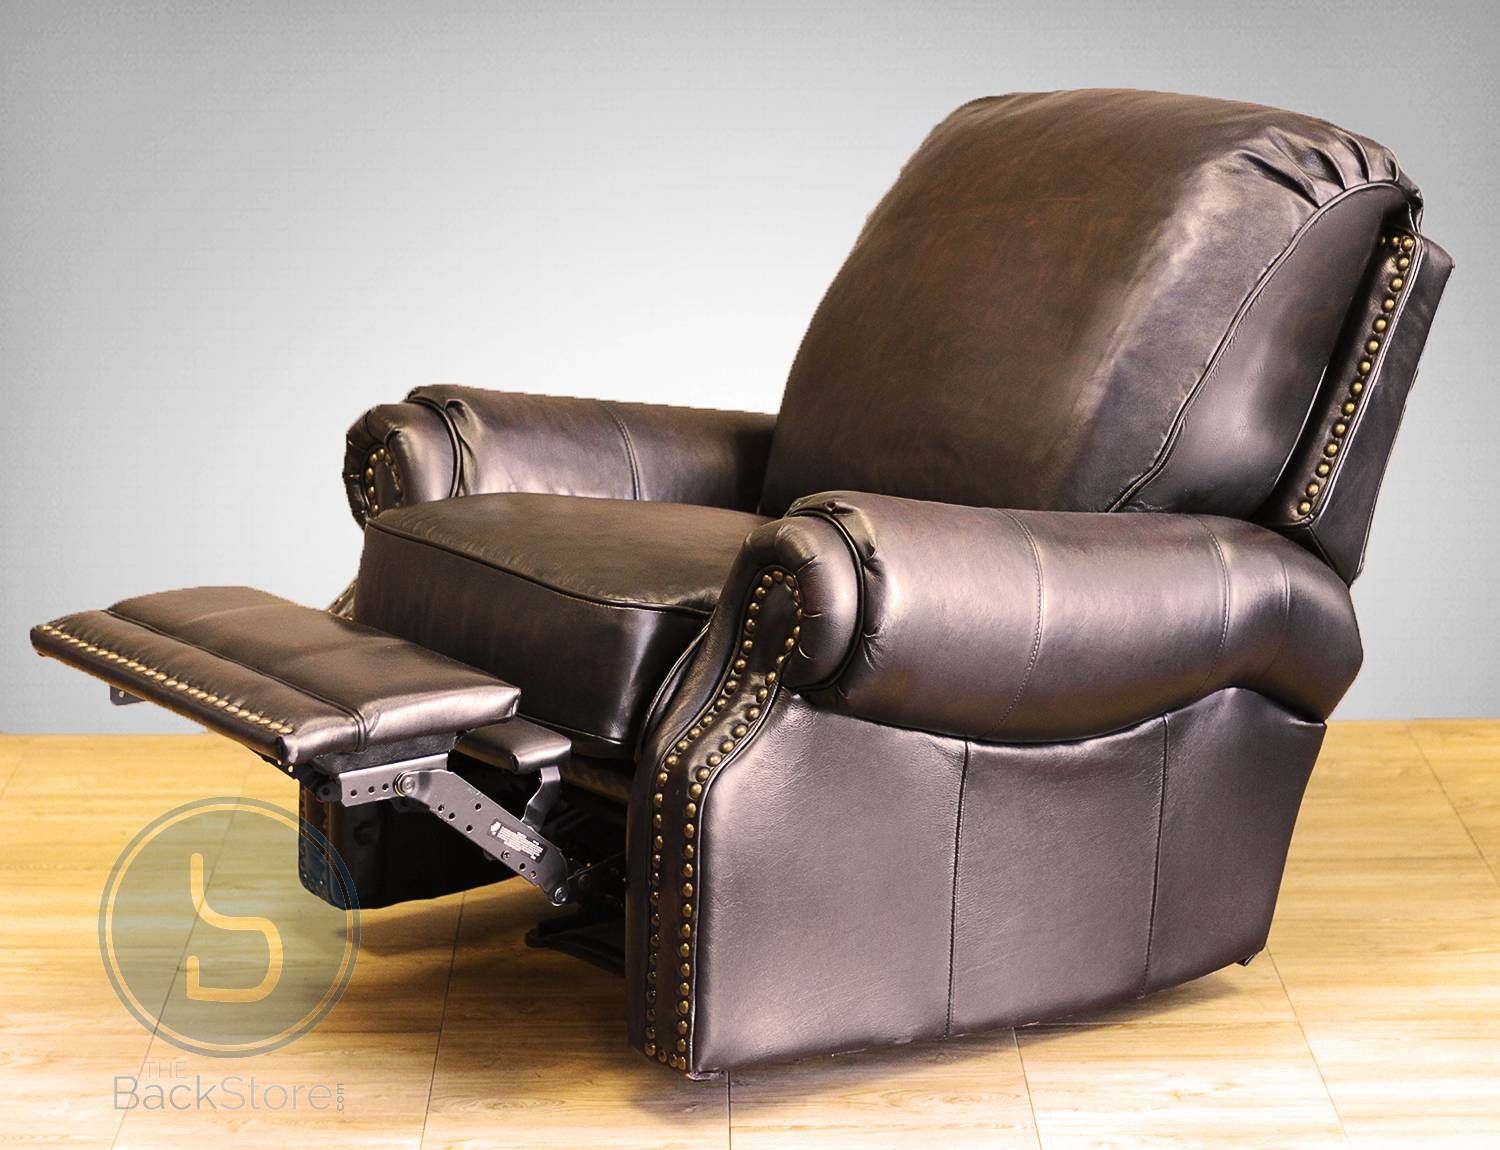 Barcalounger Premier Ii Leather Recliner Chair – Leather Recliner In Barcalounger Sofas (View 5 of 15)